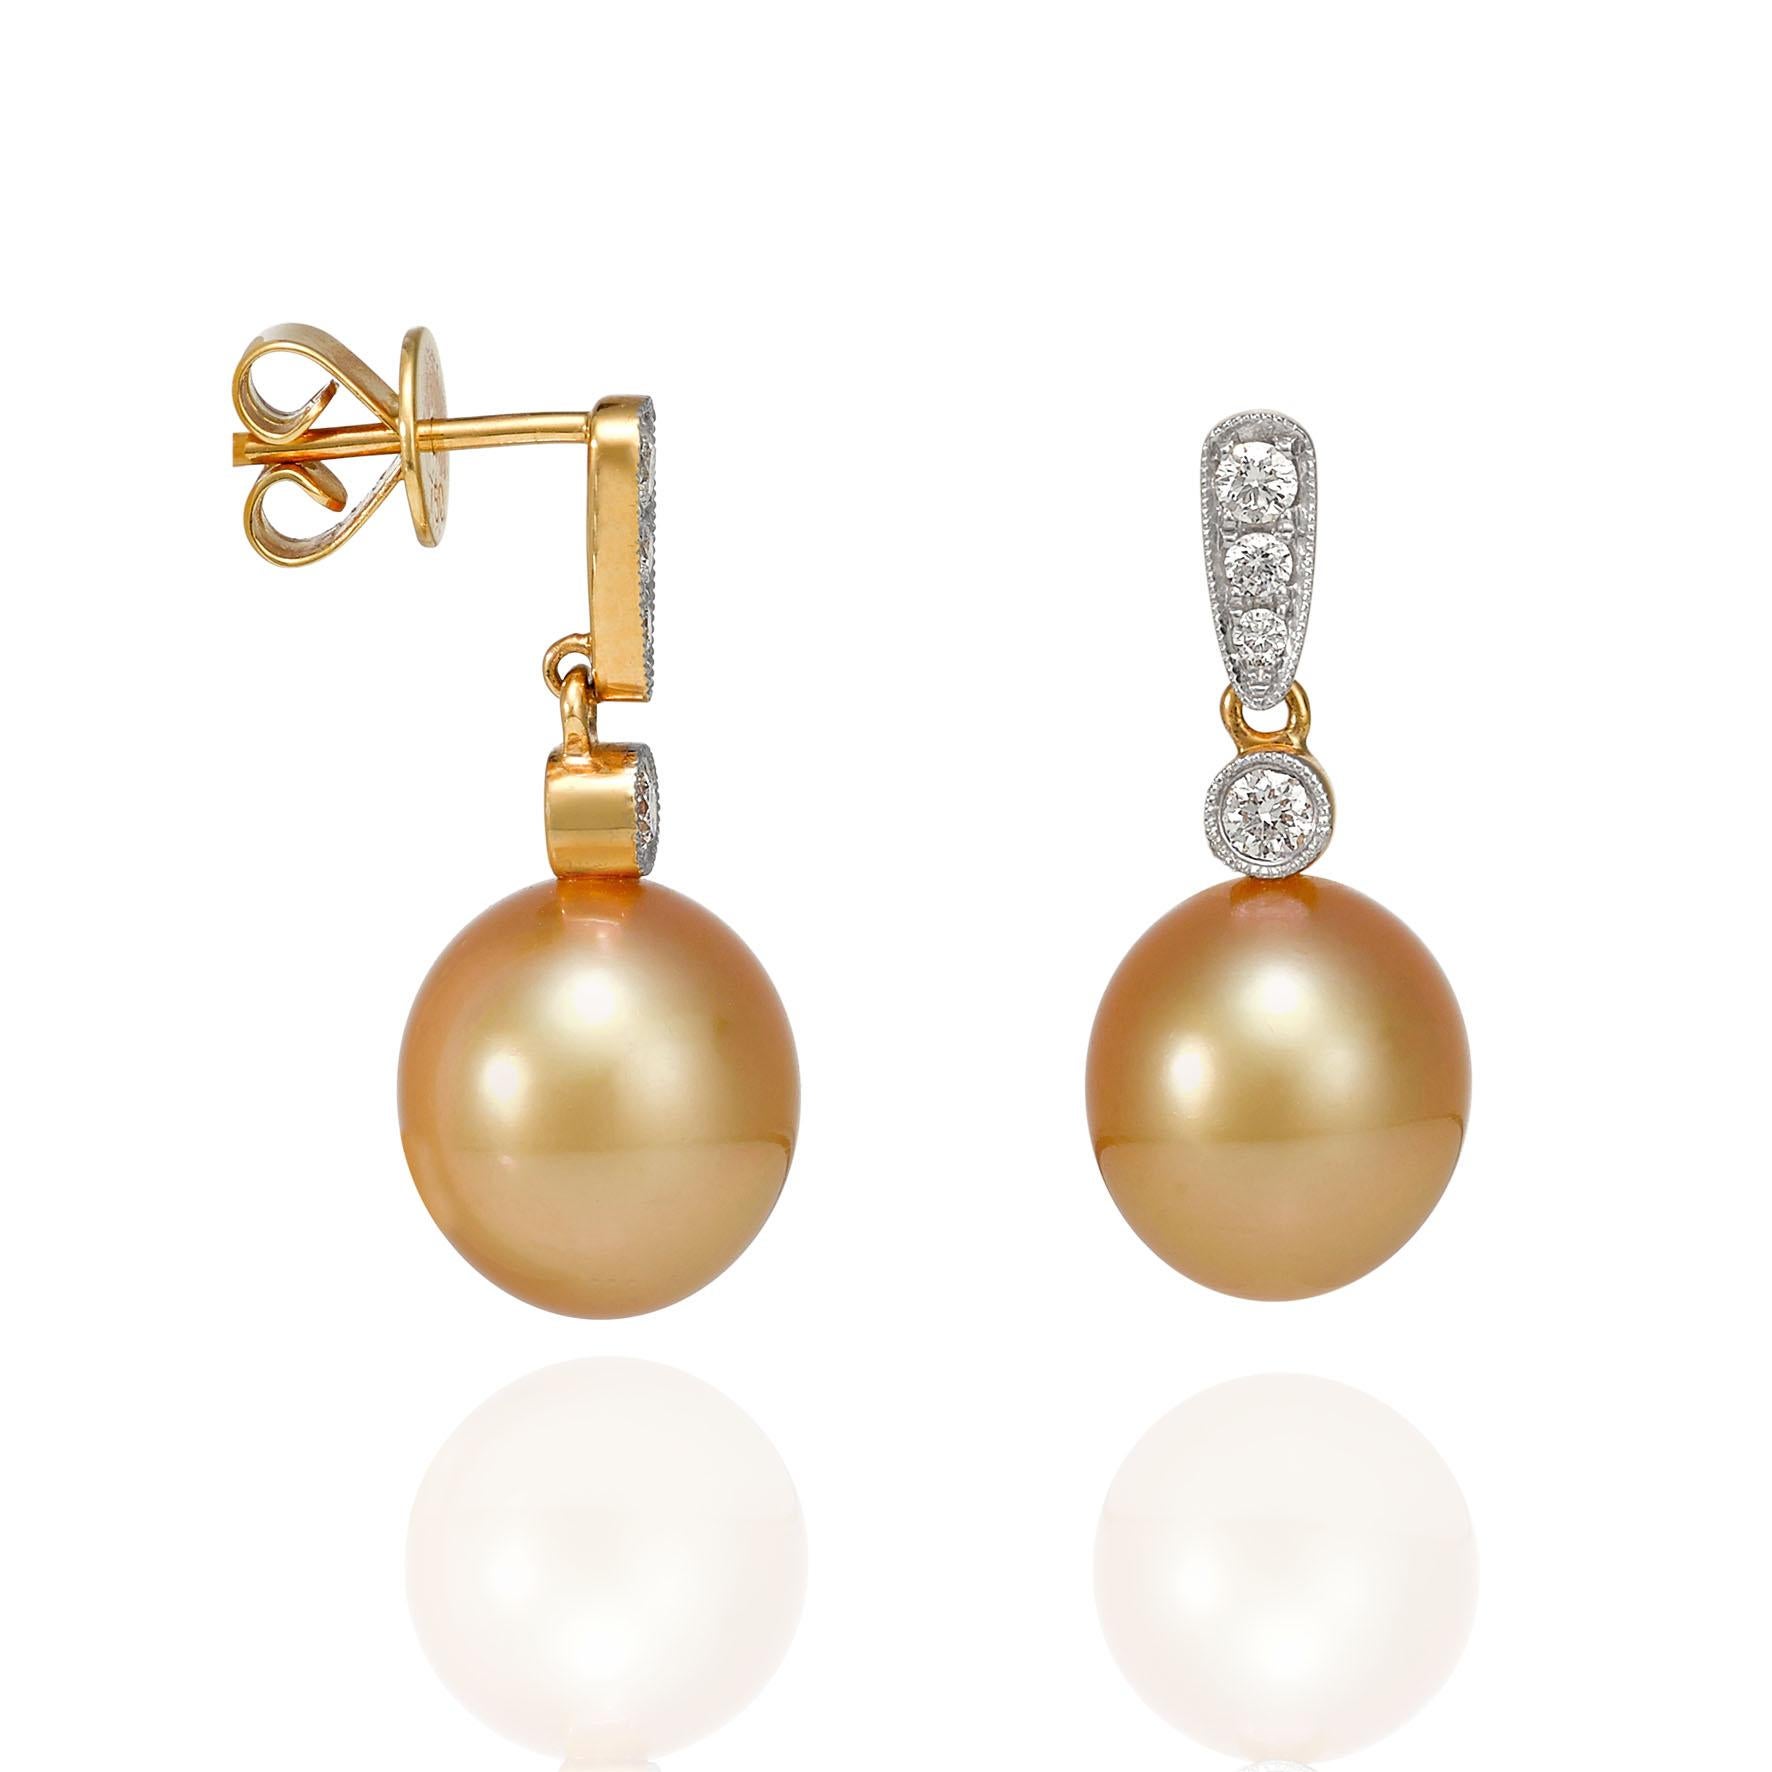 Giulians 18 karat Golden South Sea Pearl and Diamond Earrings.  Each earring features a 10mm oval shaped, gold cultured pearl with a bright lustre and smooth surface.  The pearls have been set into 18 karat yellow and white gold and diamond drops